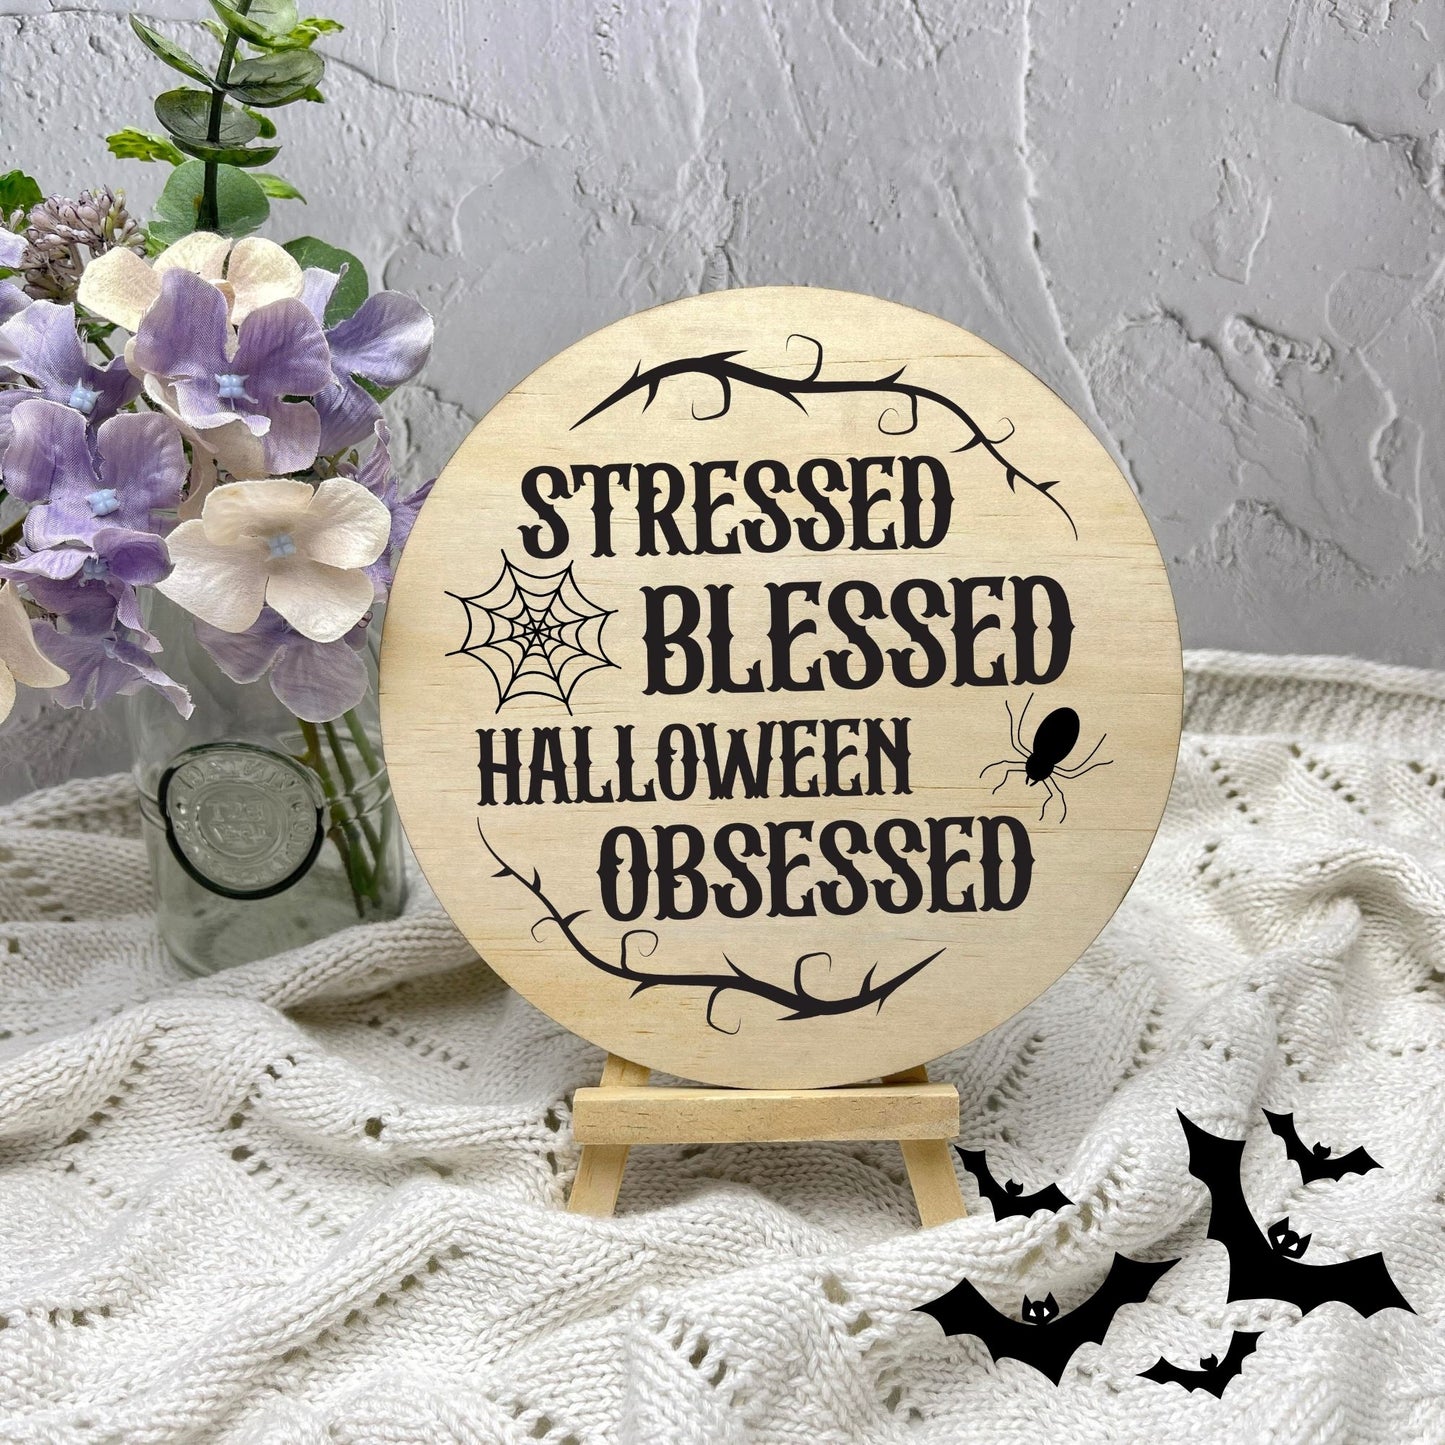 Halloween Obsessed sign, Halloween Decor, Spooky Vibes, hocus pocus sign, trick or treat decor, haunted house h50